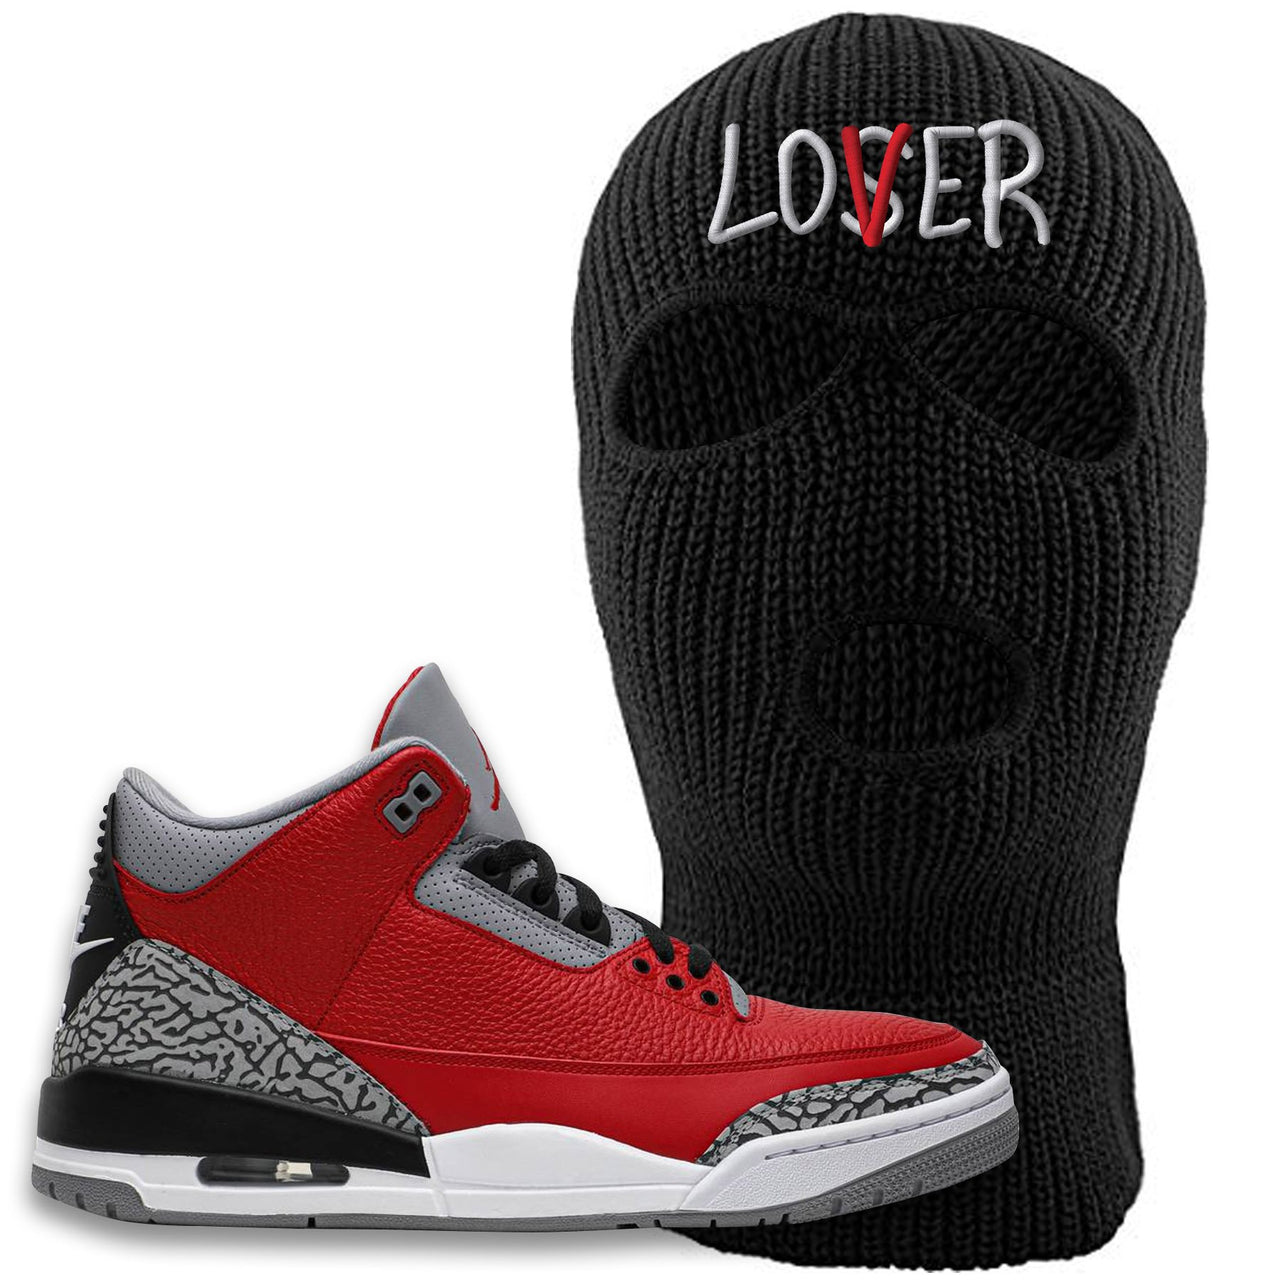 Jordan 3 Red Cement Chicago All-Star Sneaker Black Ski Mask | Winter Mask to match Jordan 3 All Star Red Cement Shoes | Lover